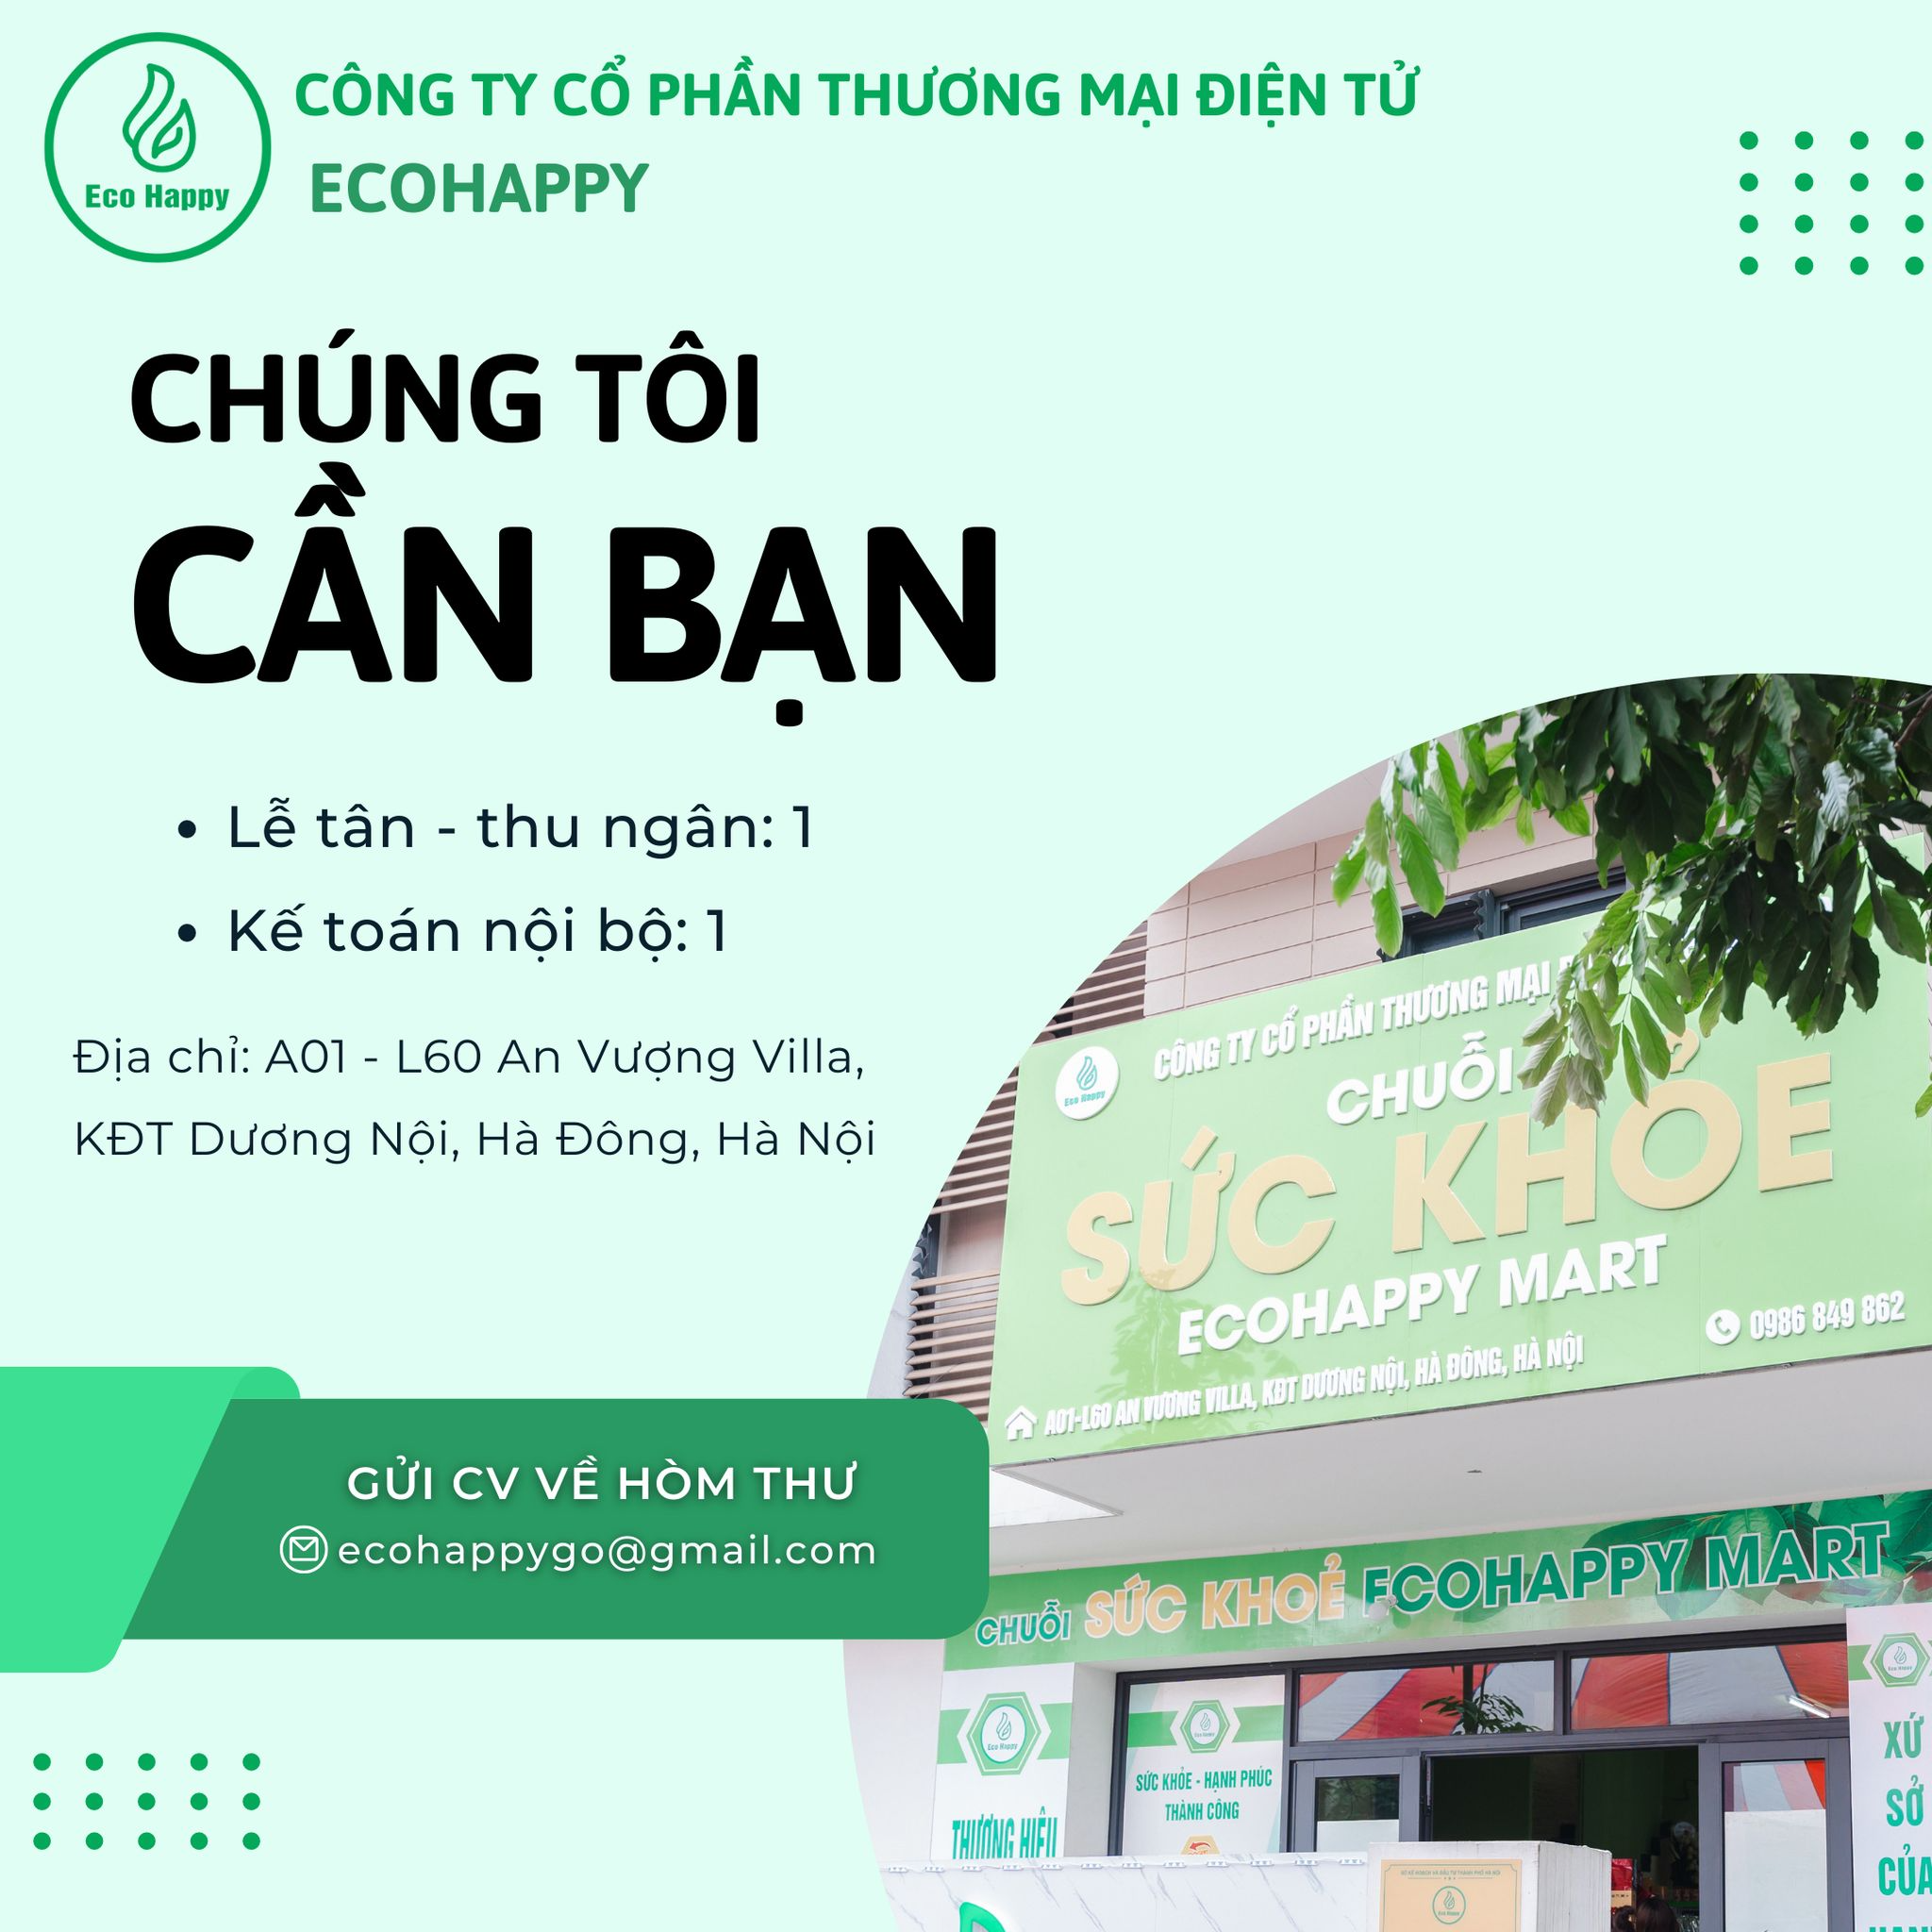 ECOHAPPY TUYỂN DỤNG